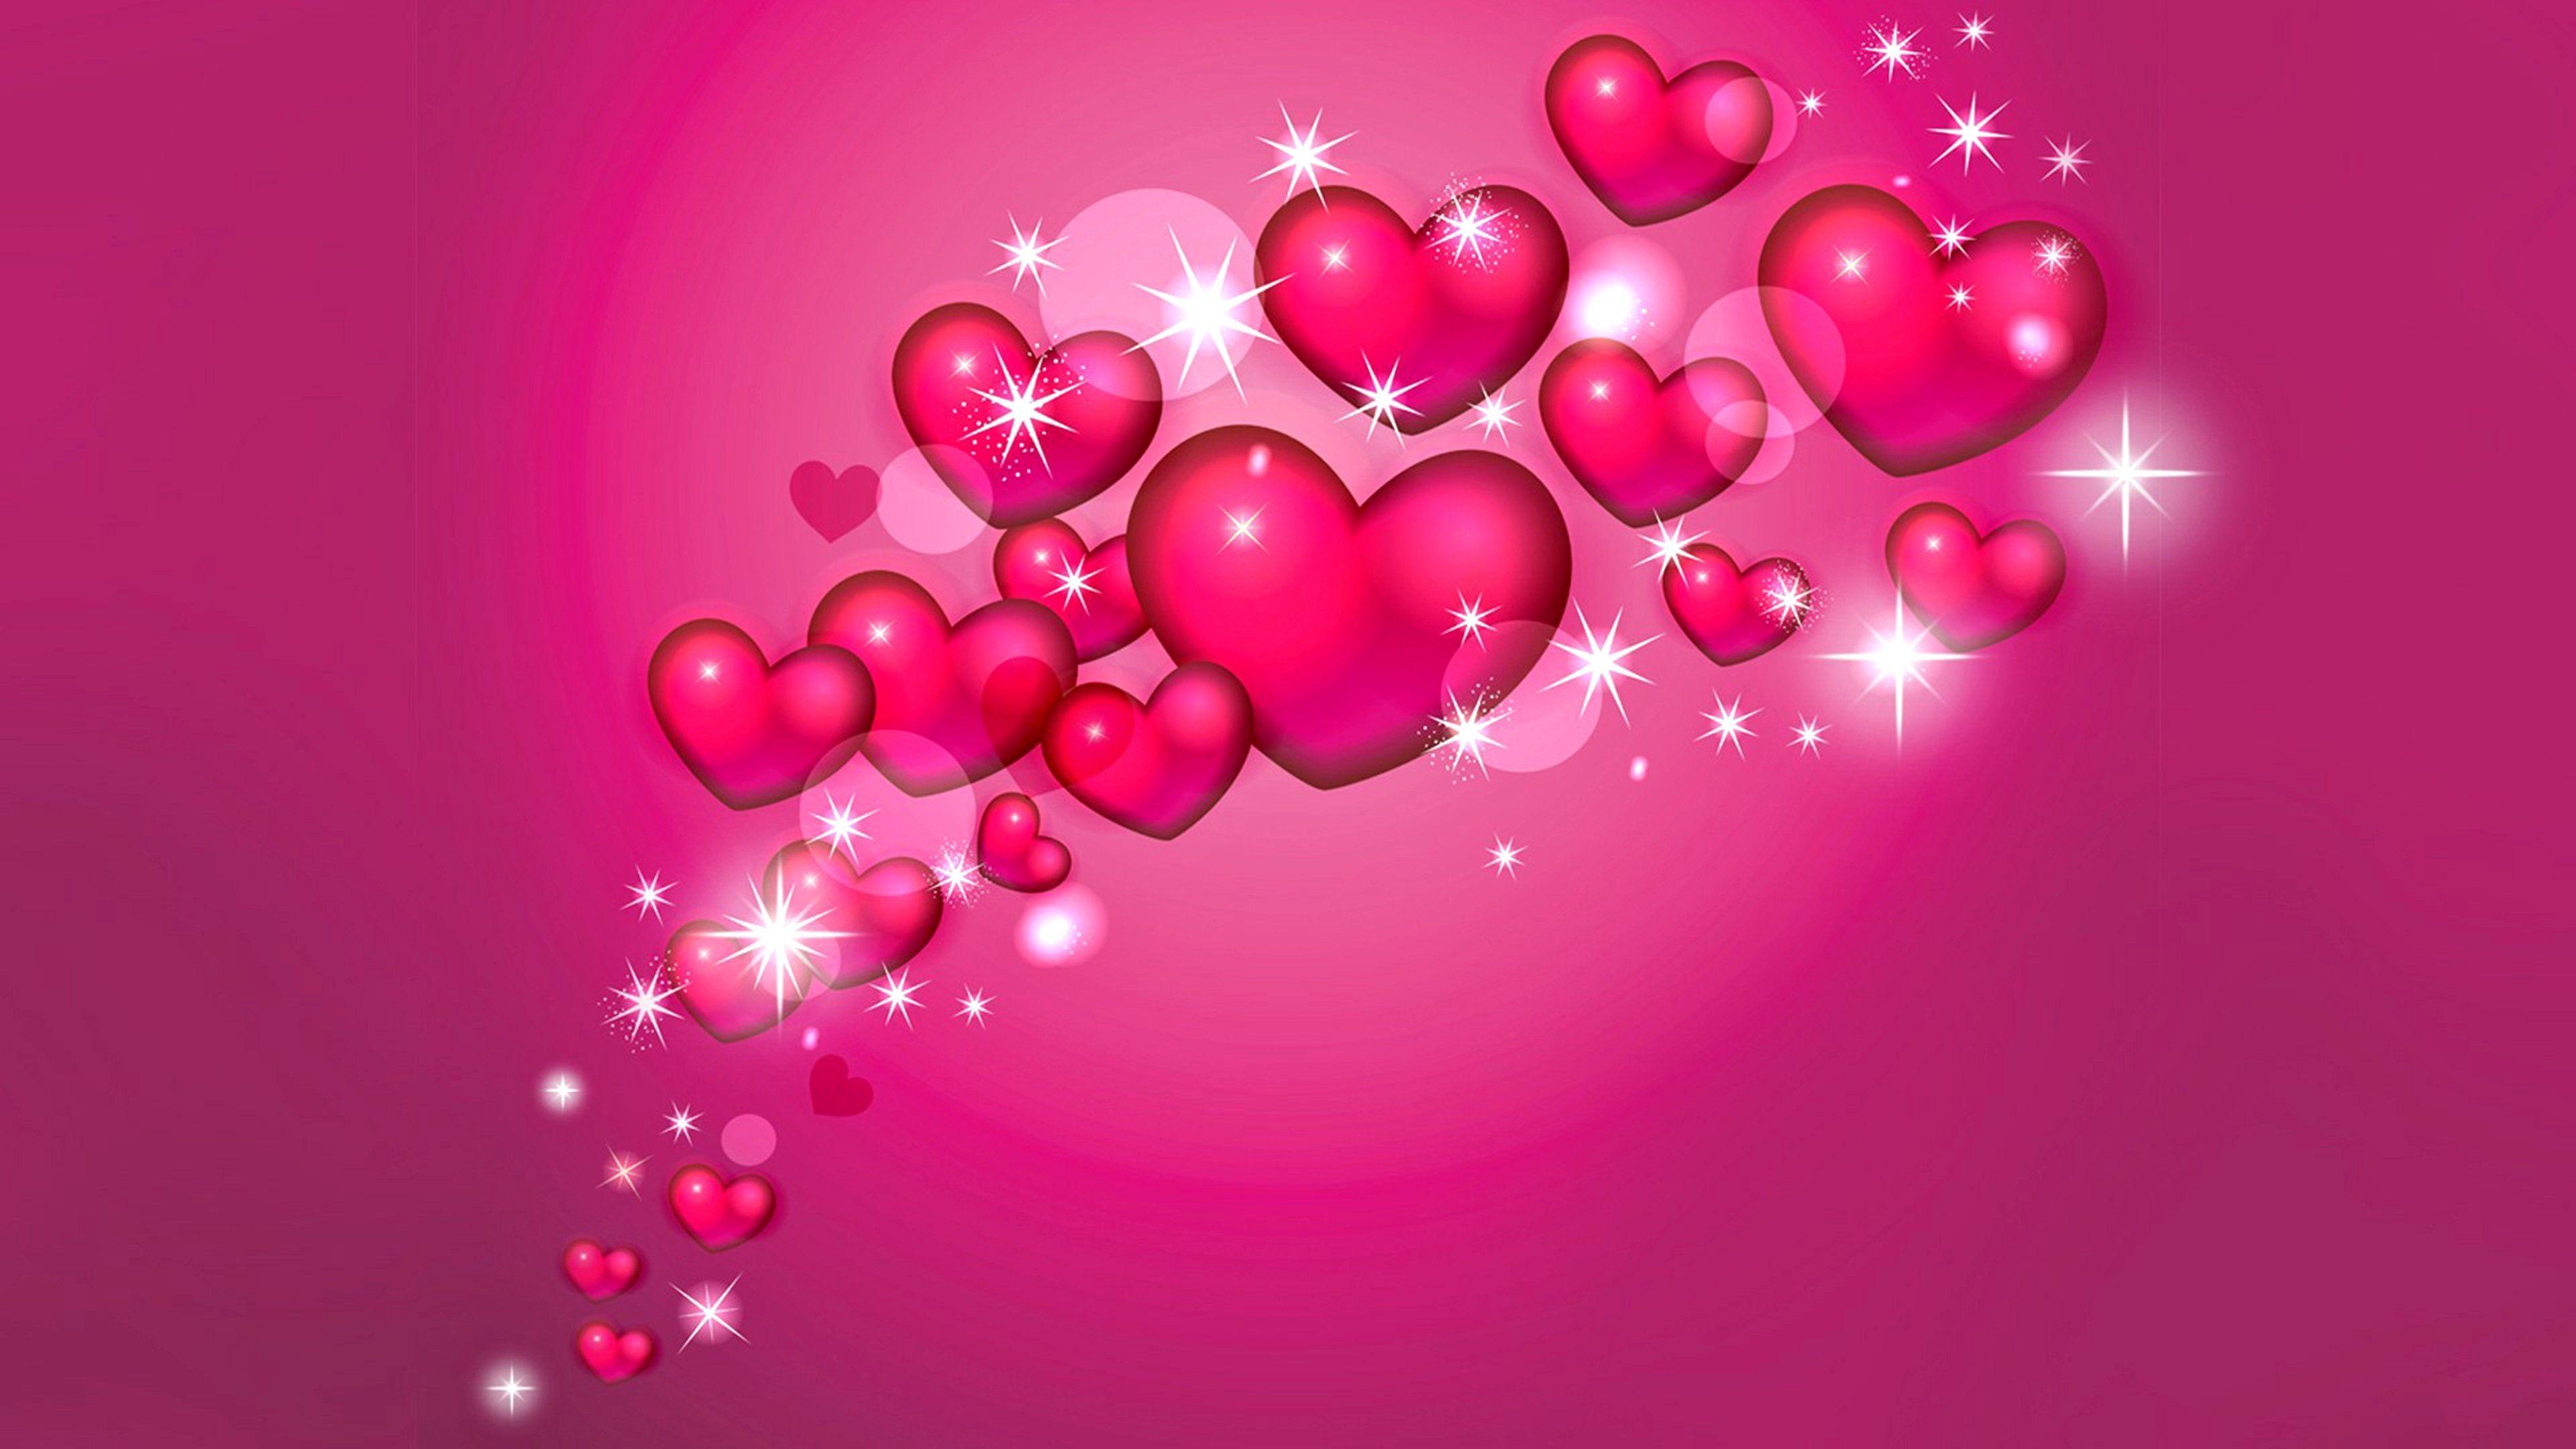 Pink Hearts 4k Ultra HD Wallpaper and Background Imagex2160